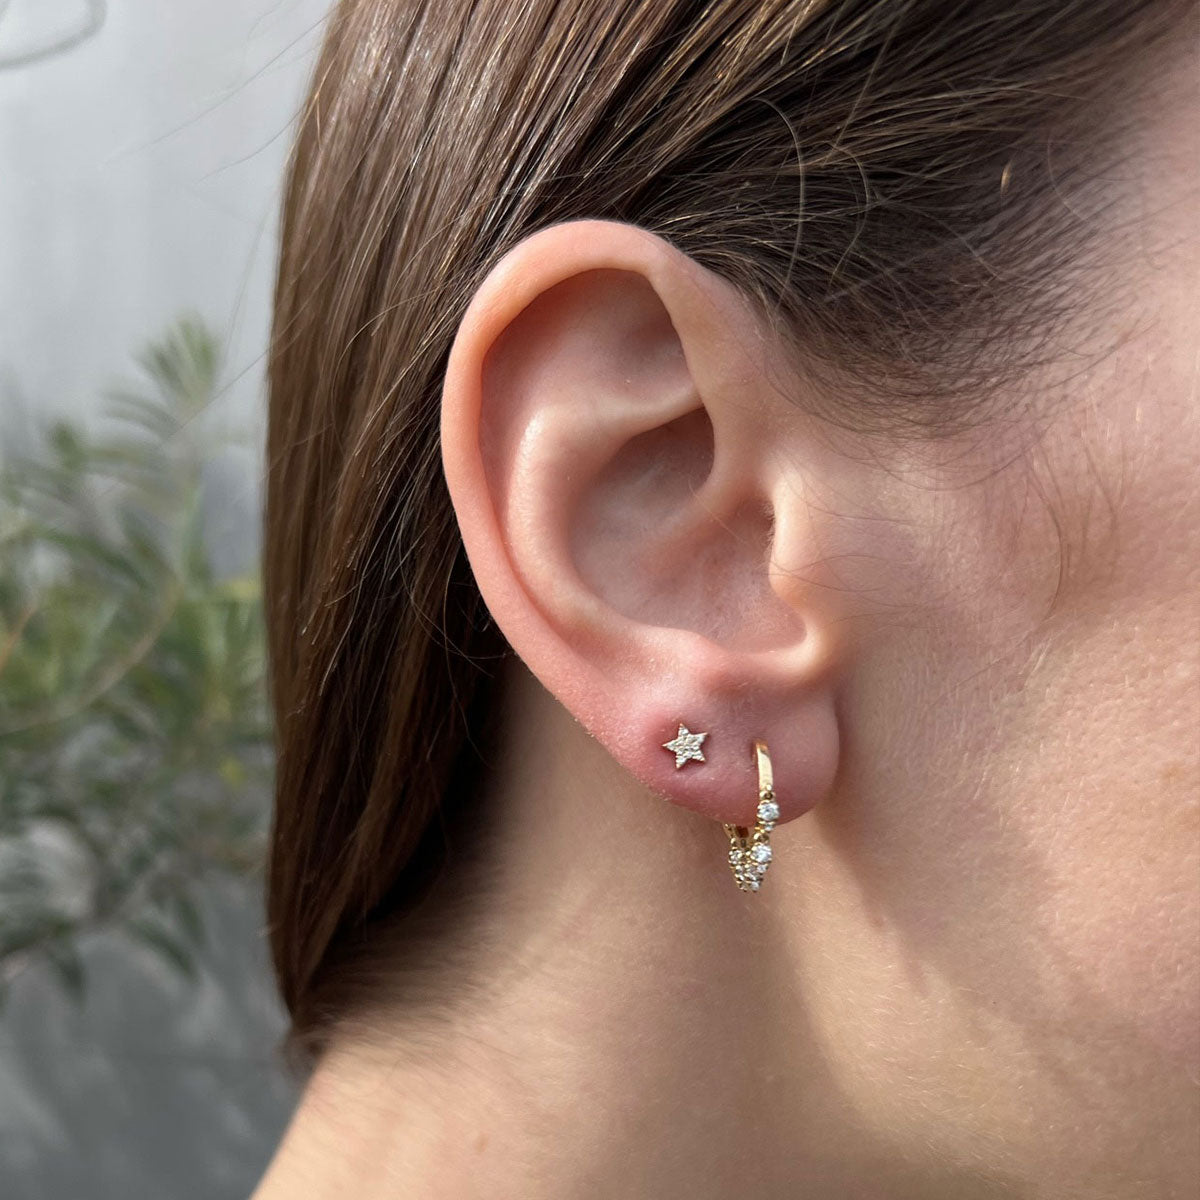 The Celestial Set in 14k Yellow Gold - 1 Diamond Star Stud Styled on Ear